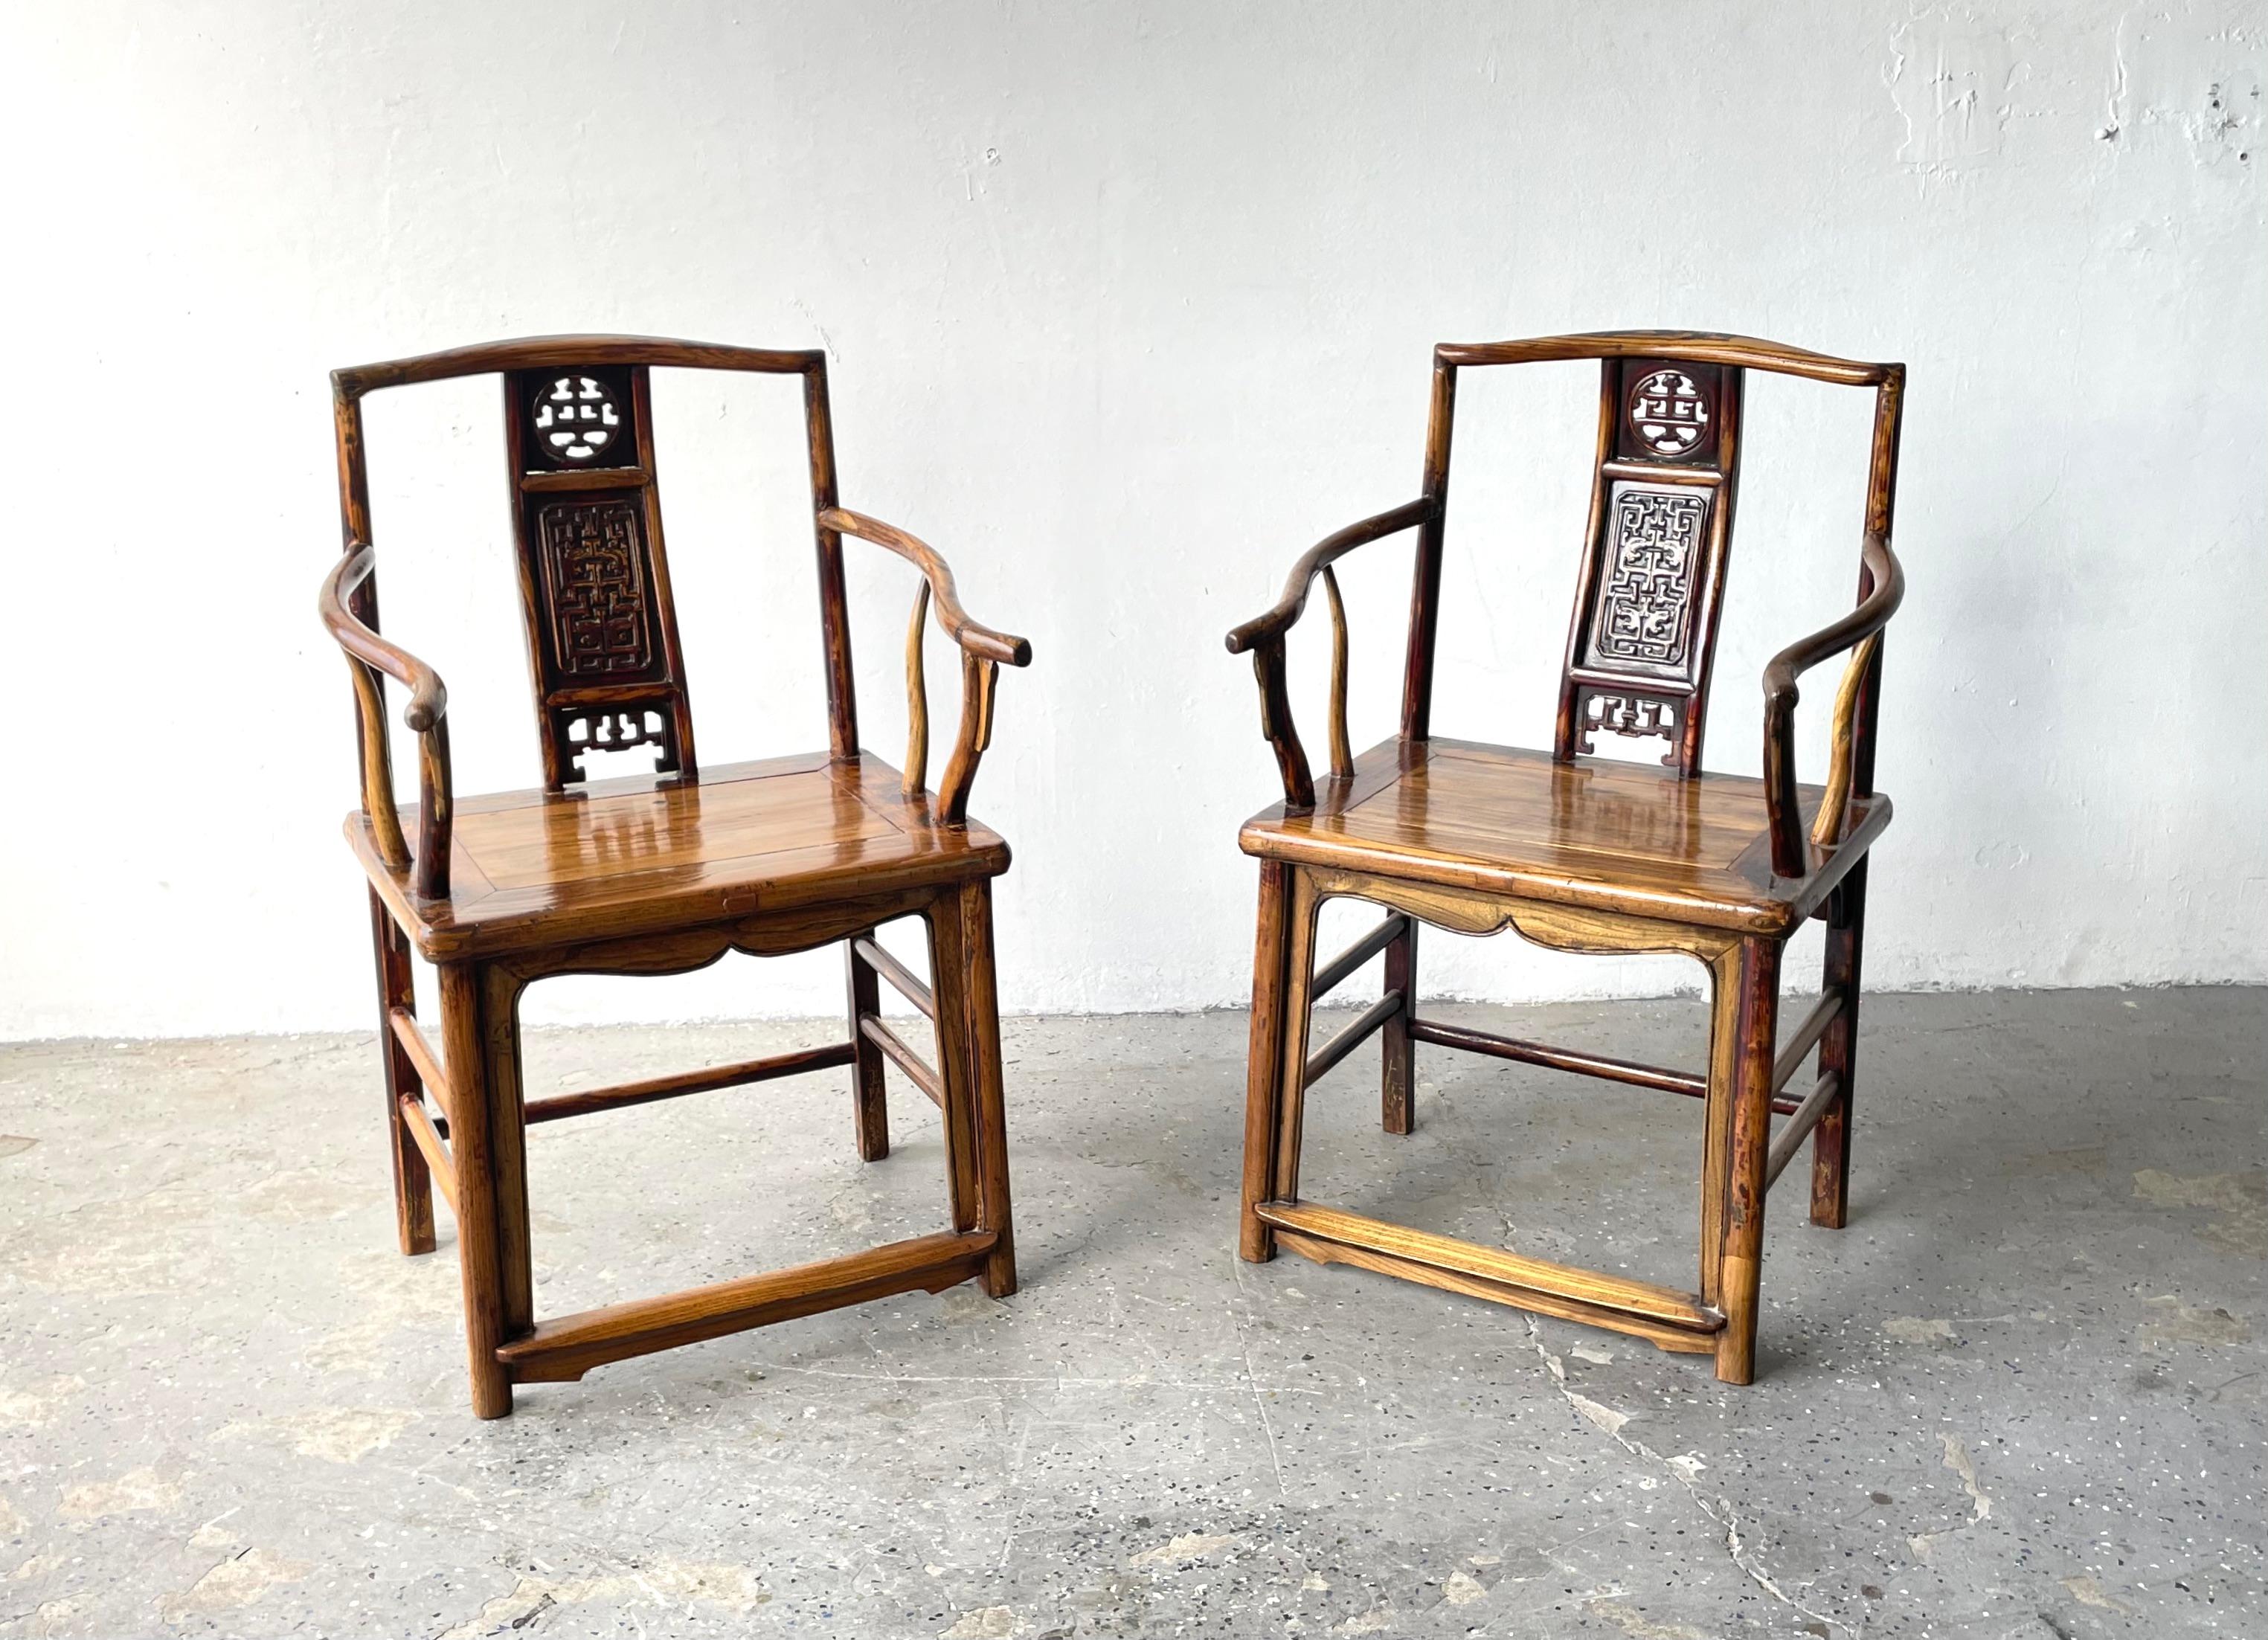 Chinese Export Gorgeous Pair of 19th, '1800's' Century Chinese Hardwood Arm Chairs For Sale